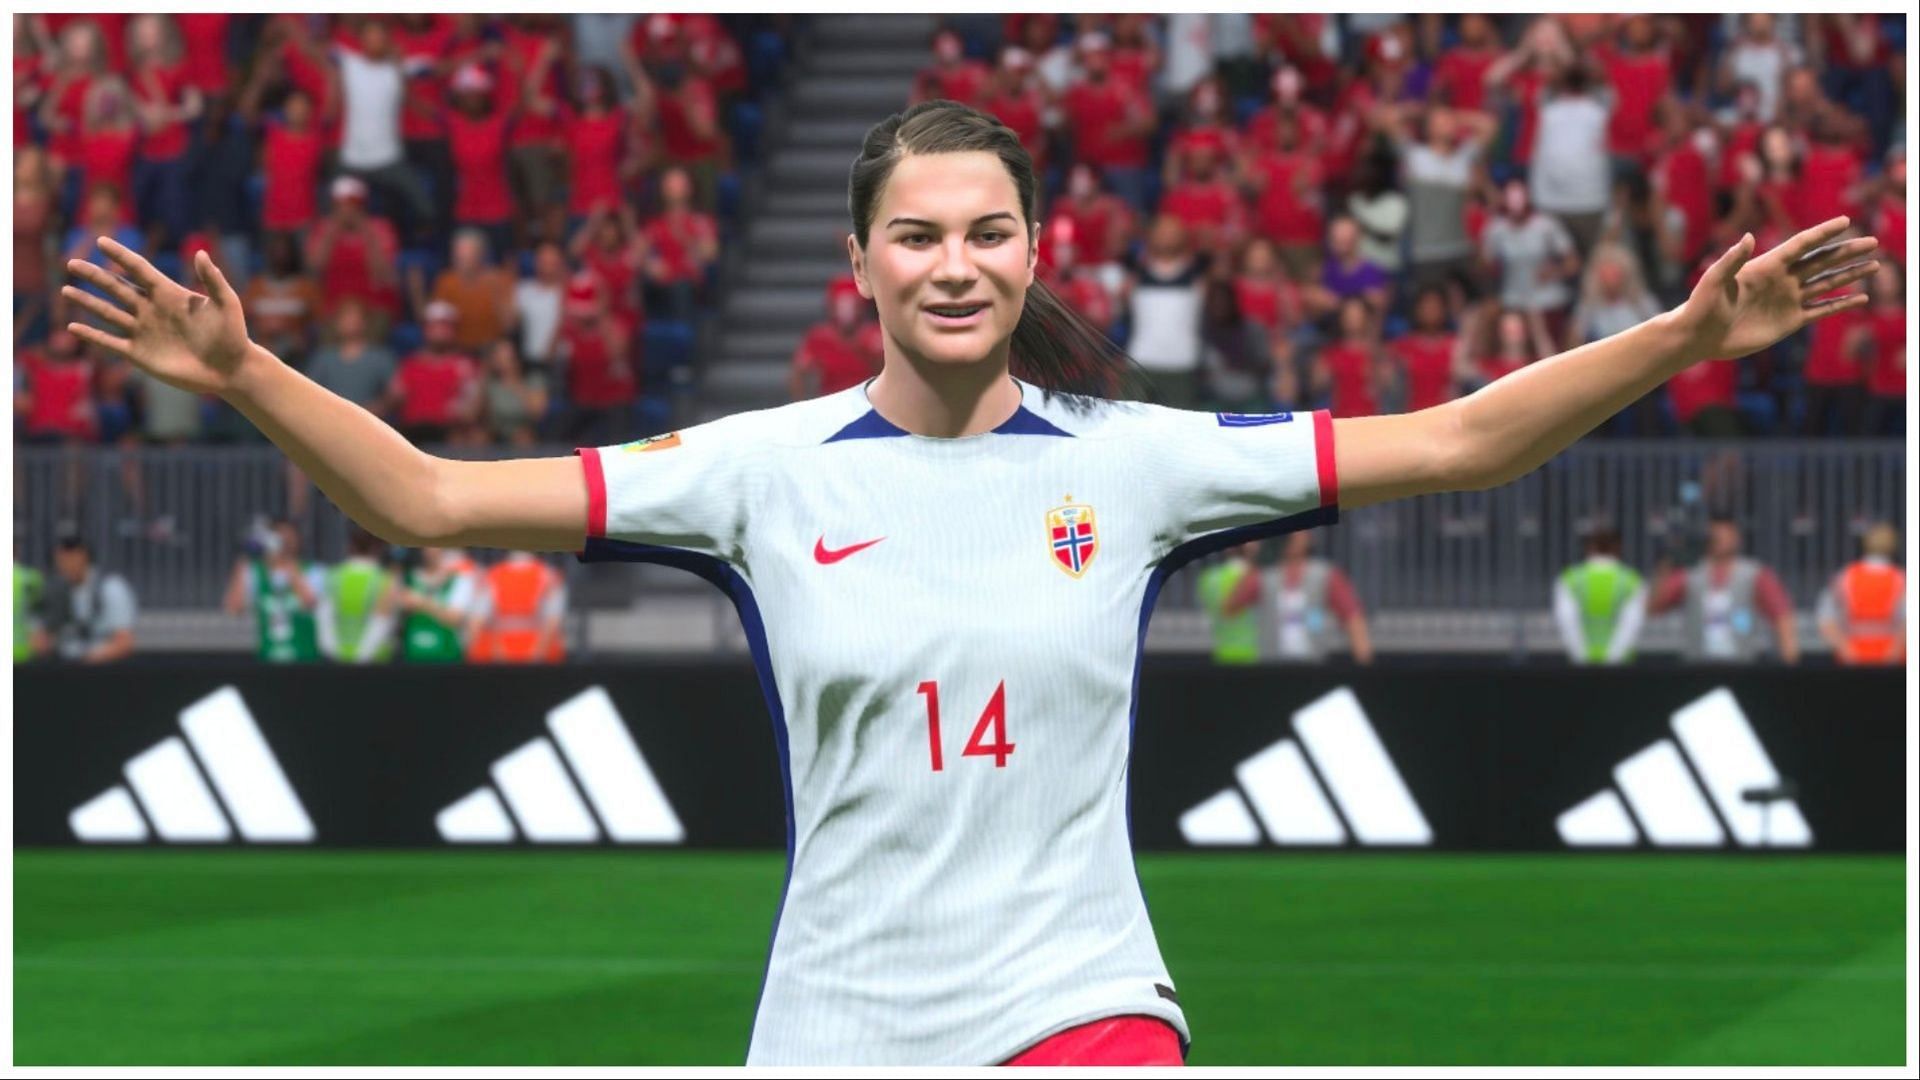 Hegerberg could be featured in Team of the Season (Image via EA Sports)